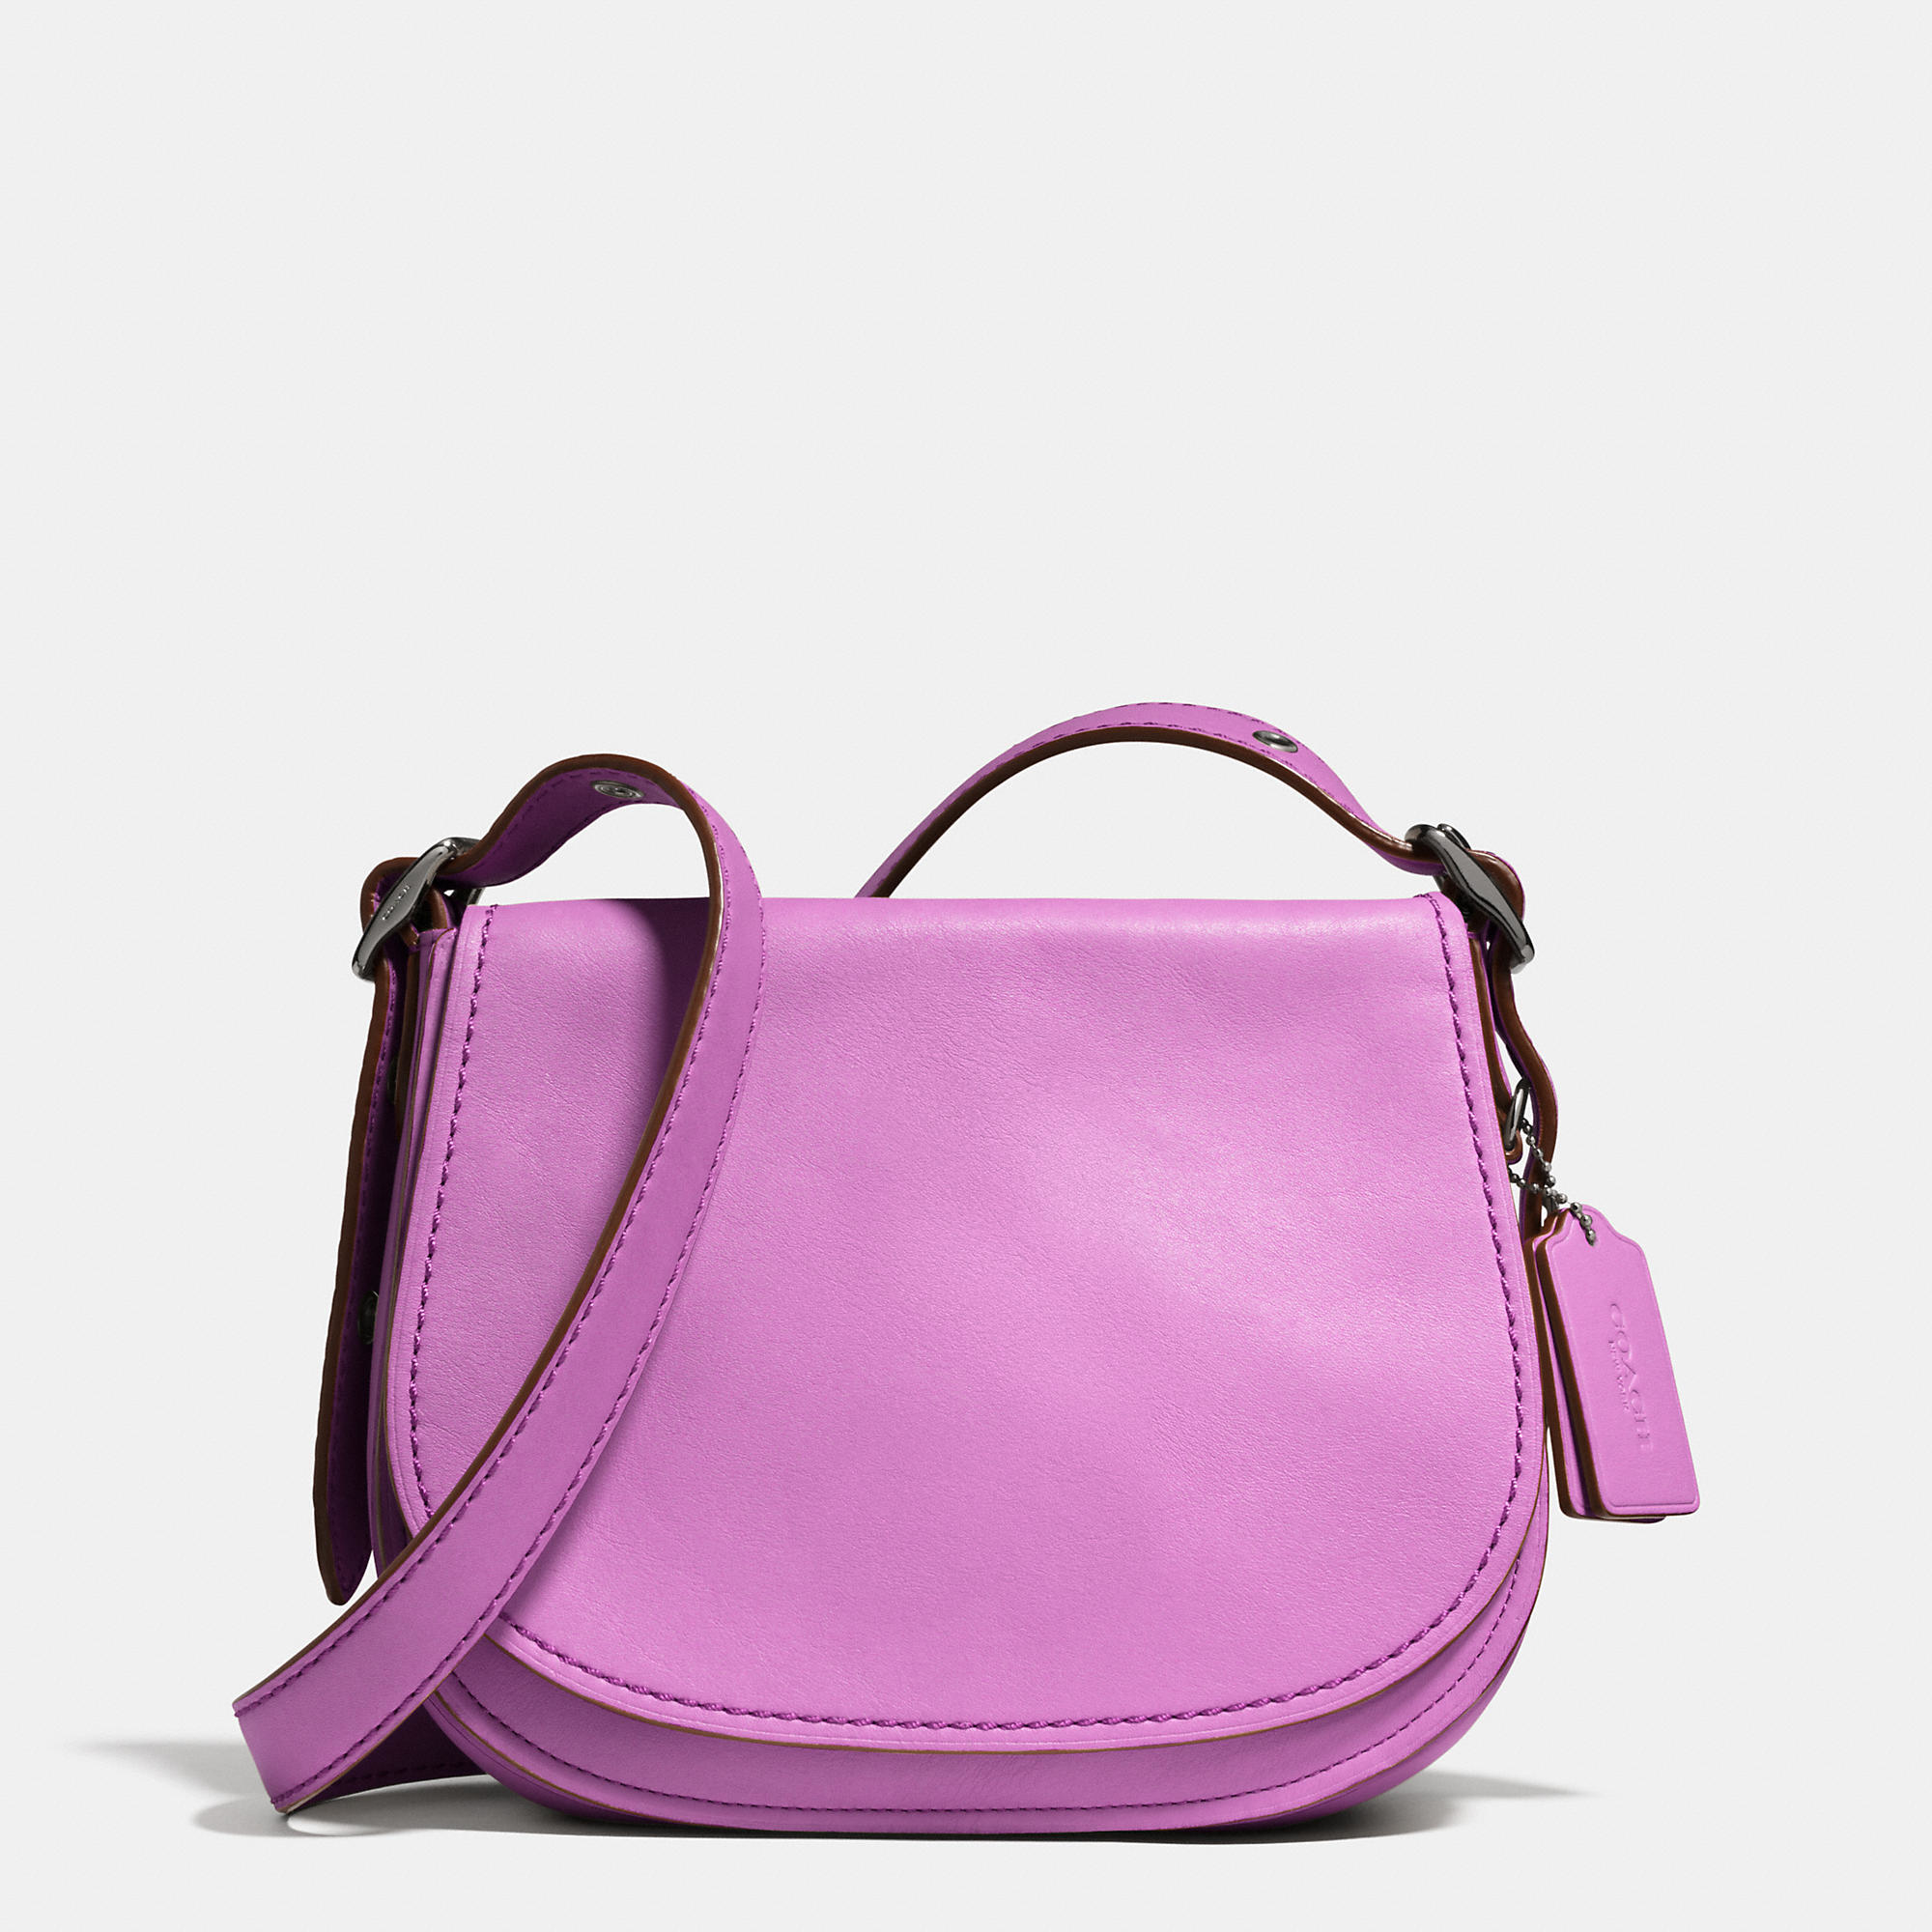 COACH Saddle Bag 23 In Glovetanned Leather in Purple - Lyst